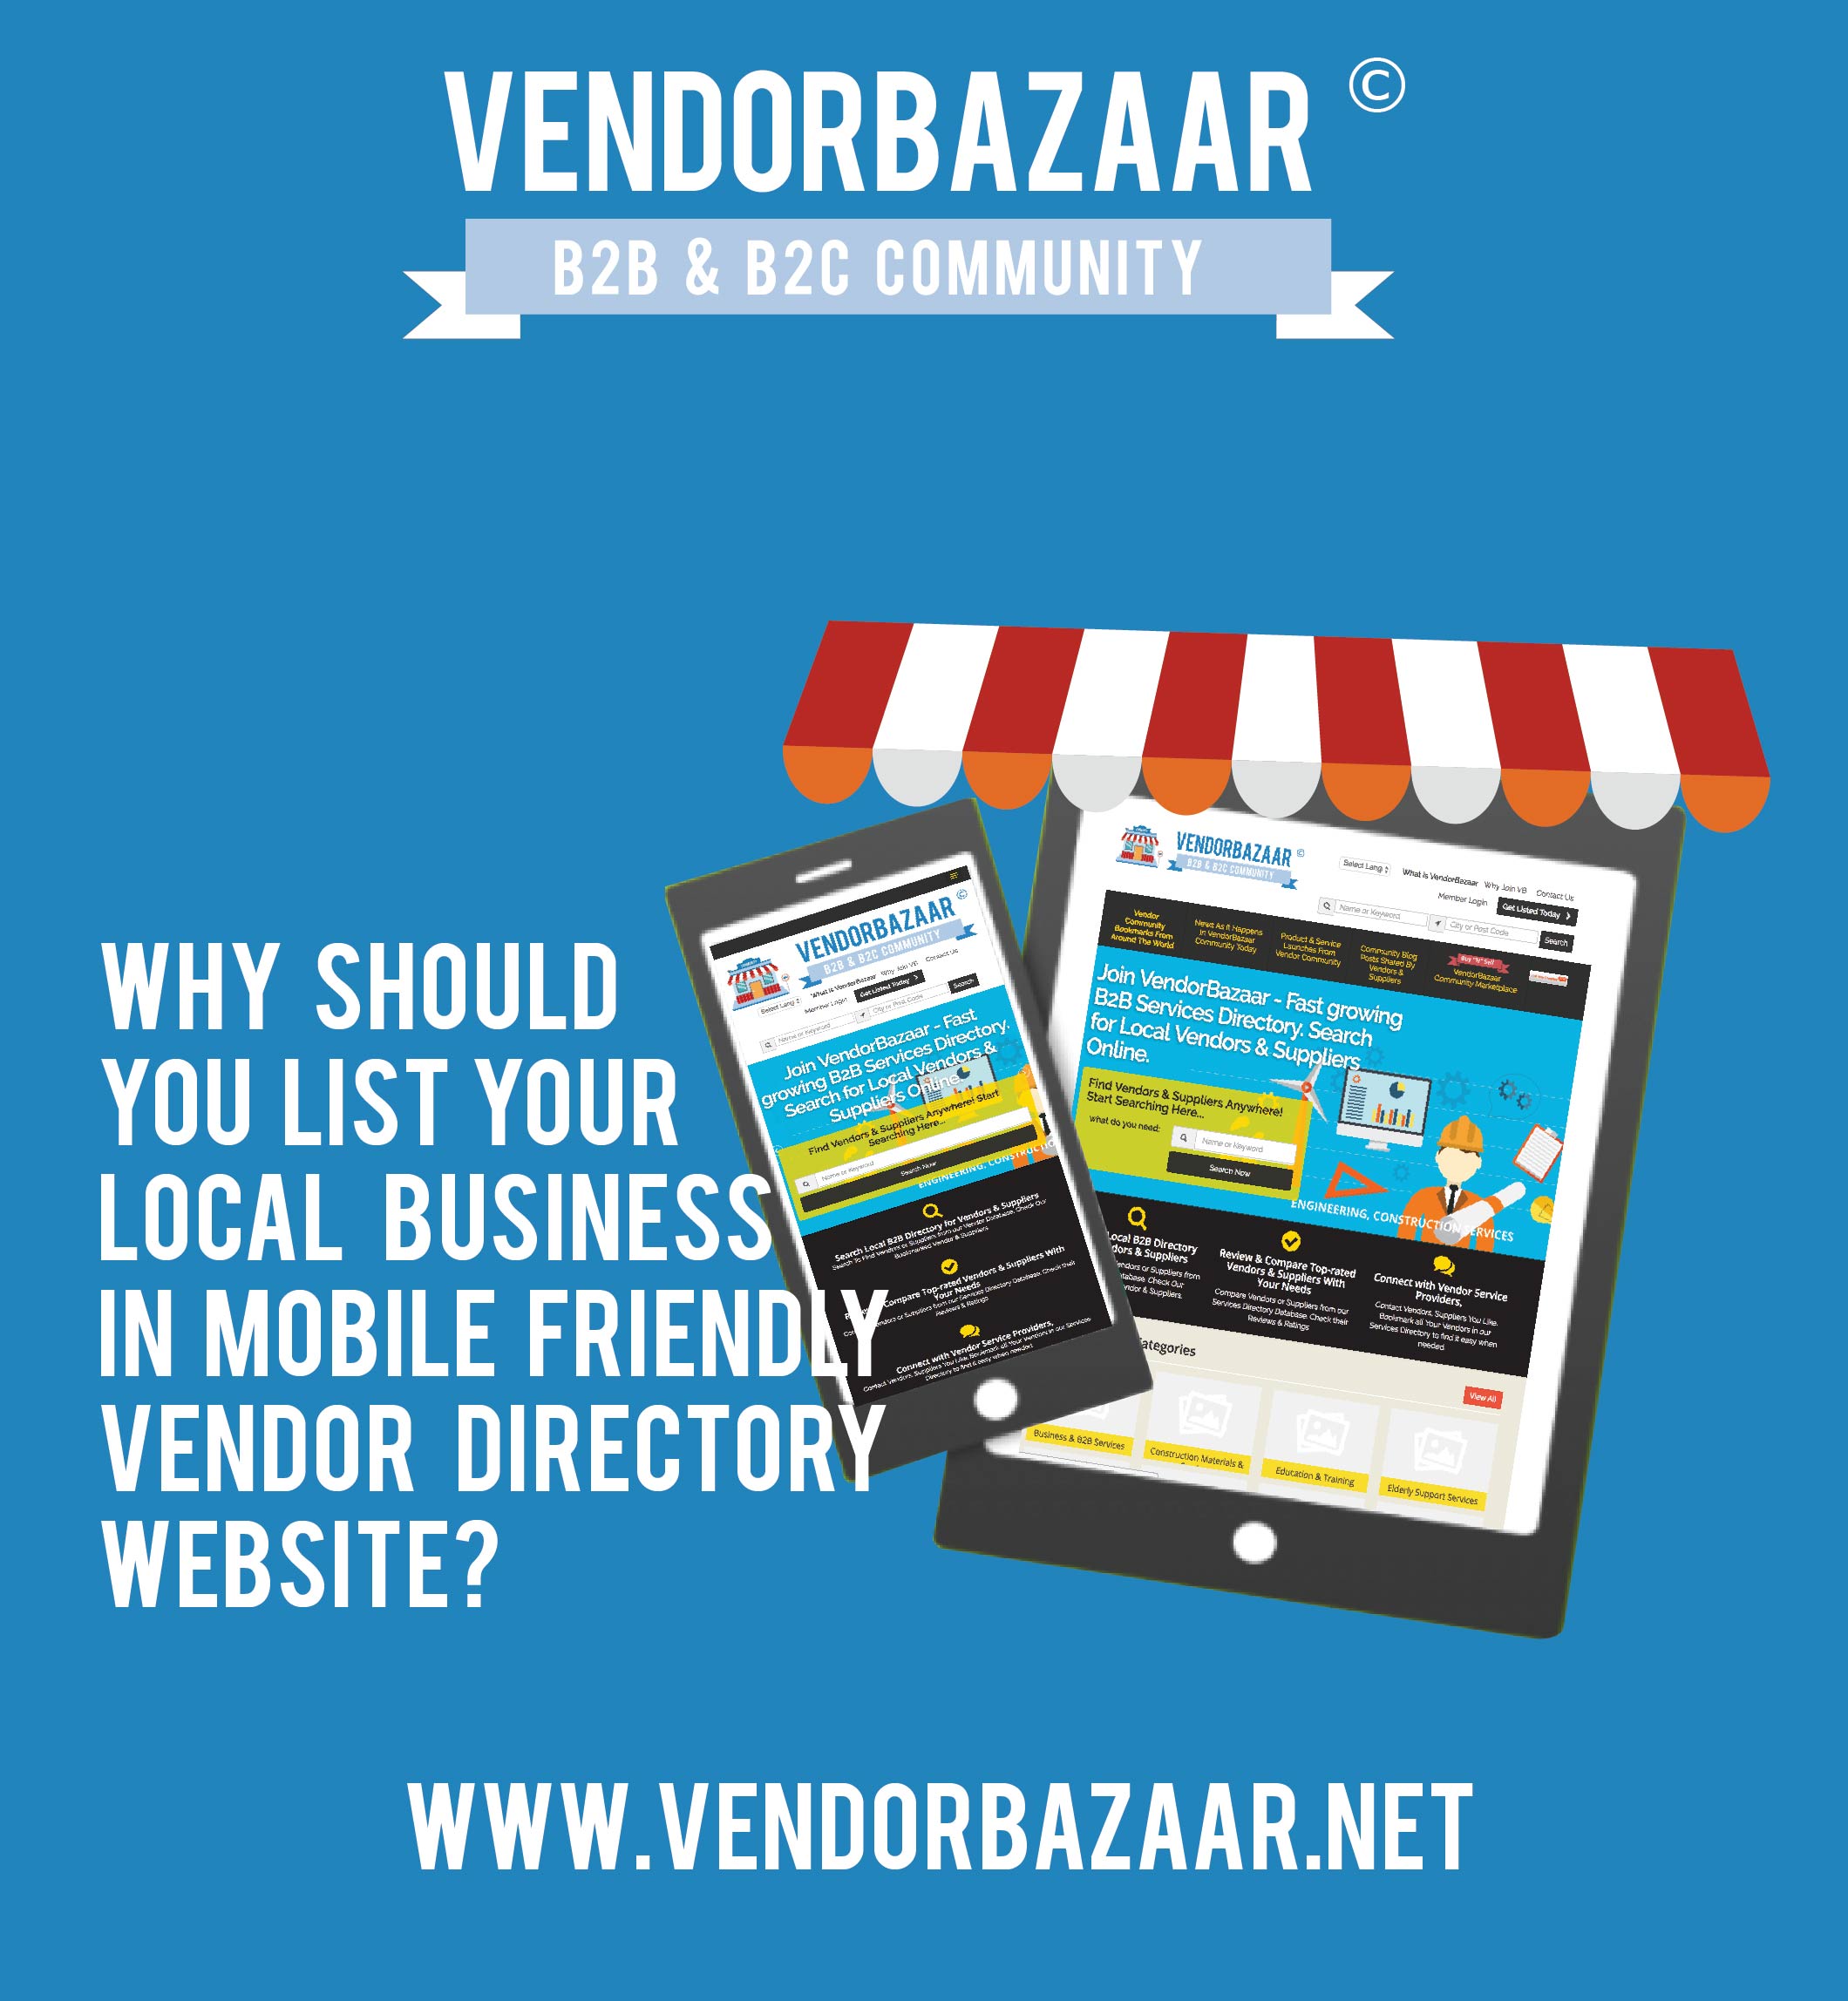 Why Should You List Your Local Business in Mobile Friendly Vendor Directory Website?